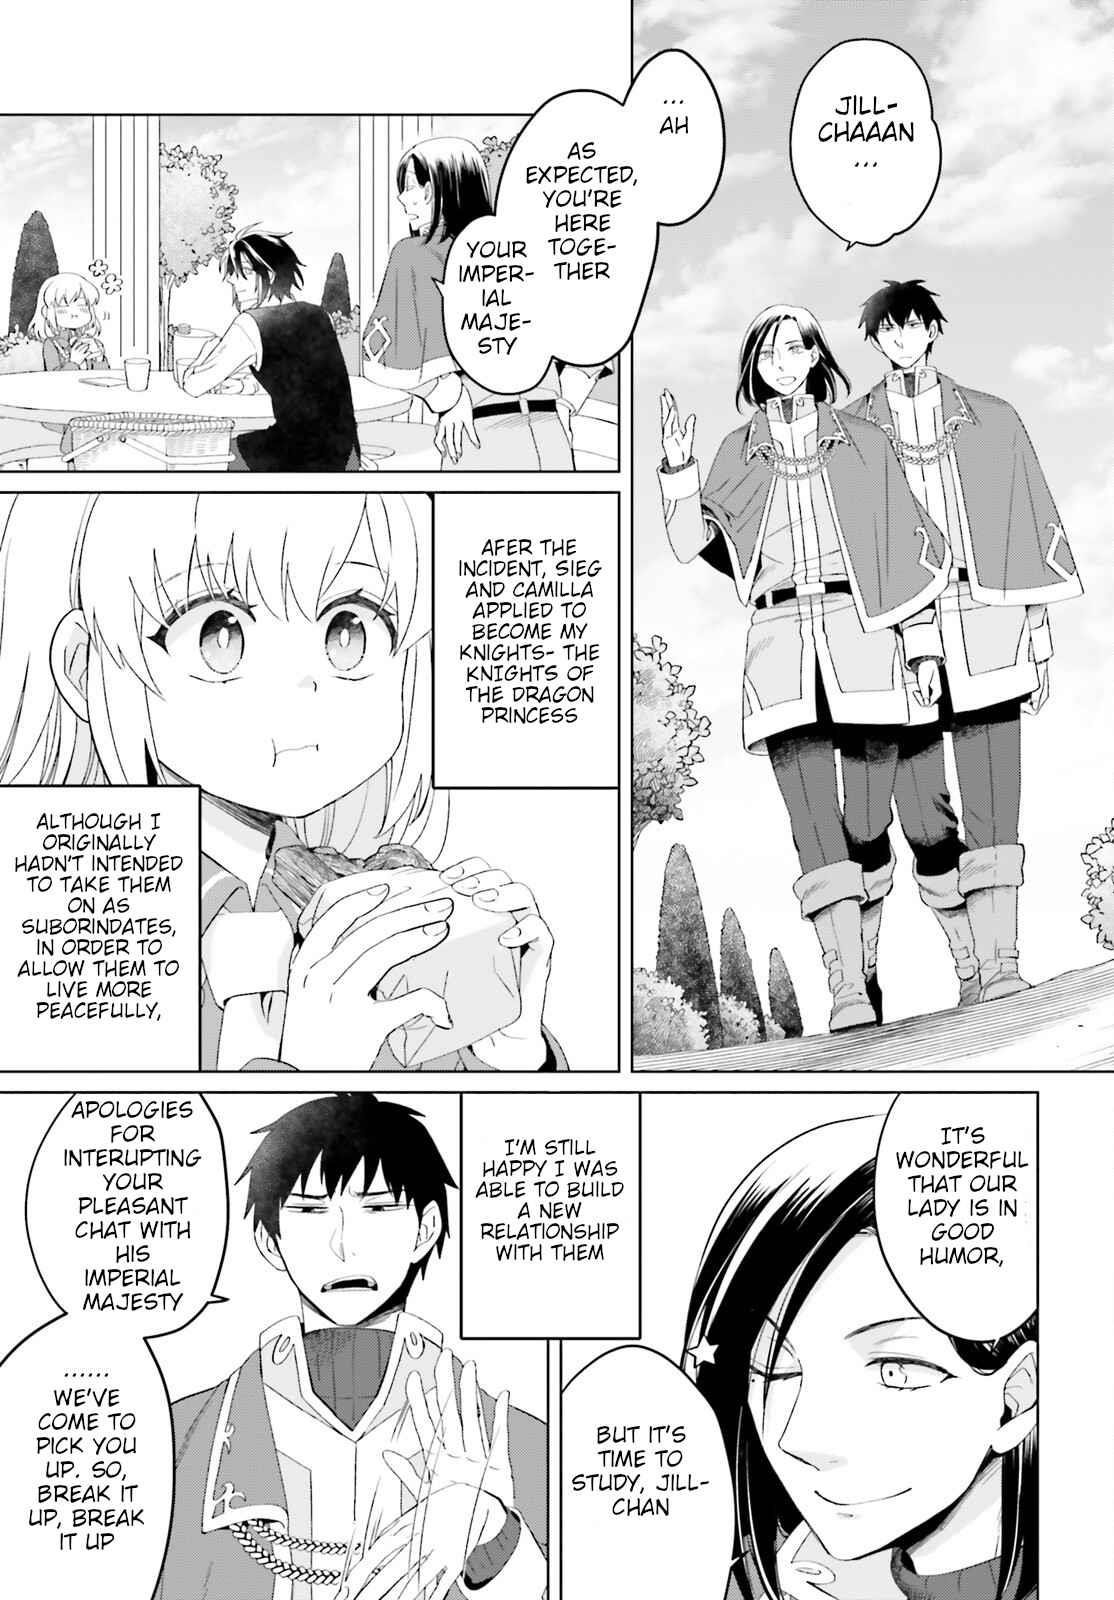 Win Over the Dragon Emperor This Time Around, Noble Girl! Chapter 10 - Page 7